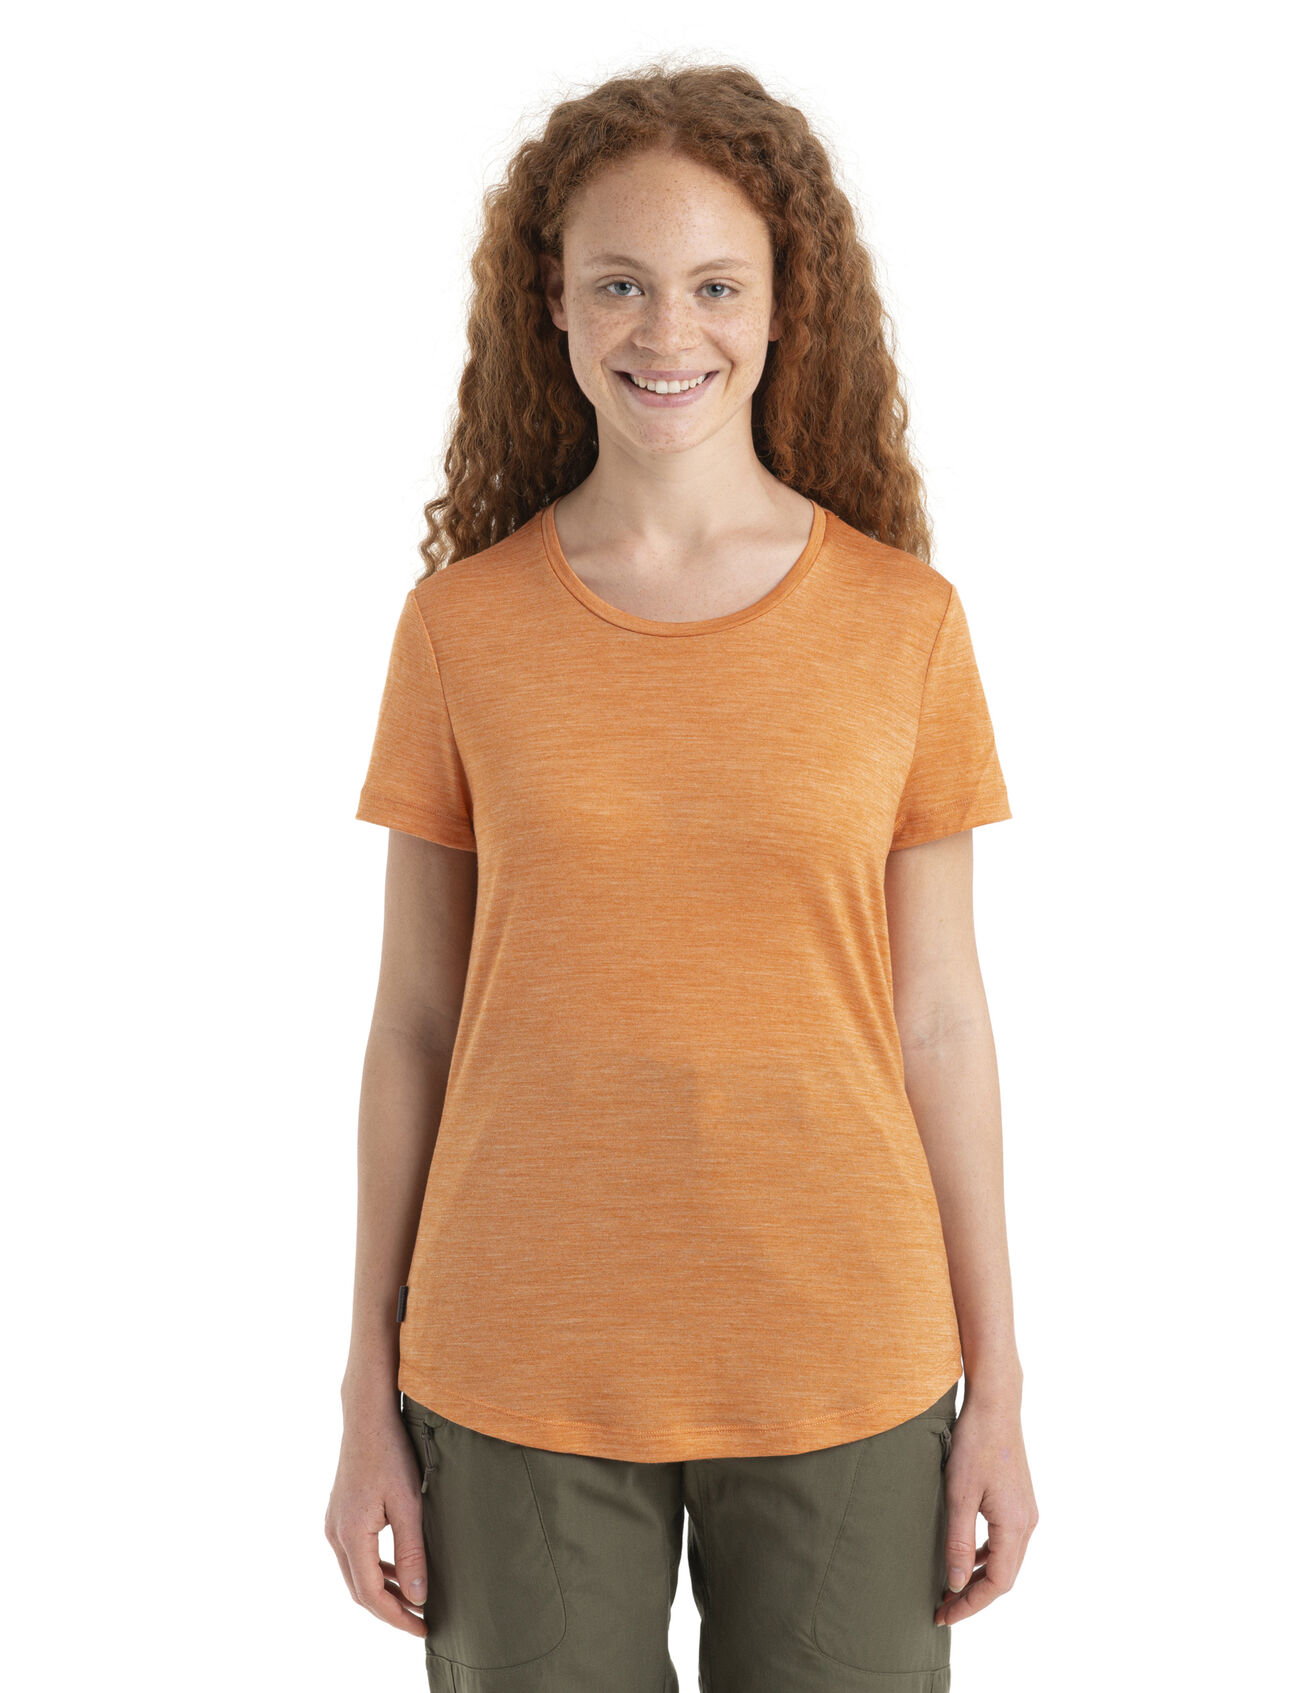 Womens Merino Sphere II Short Sleeve Tee A soft merino-blend tee made with our lightweight Cool-Lite™ jersey fabric, the Sphere II Short Sleeve Tee provides natural breathability, odor resistance and comfort.